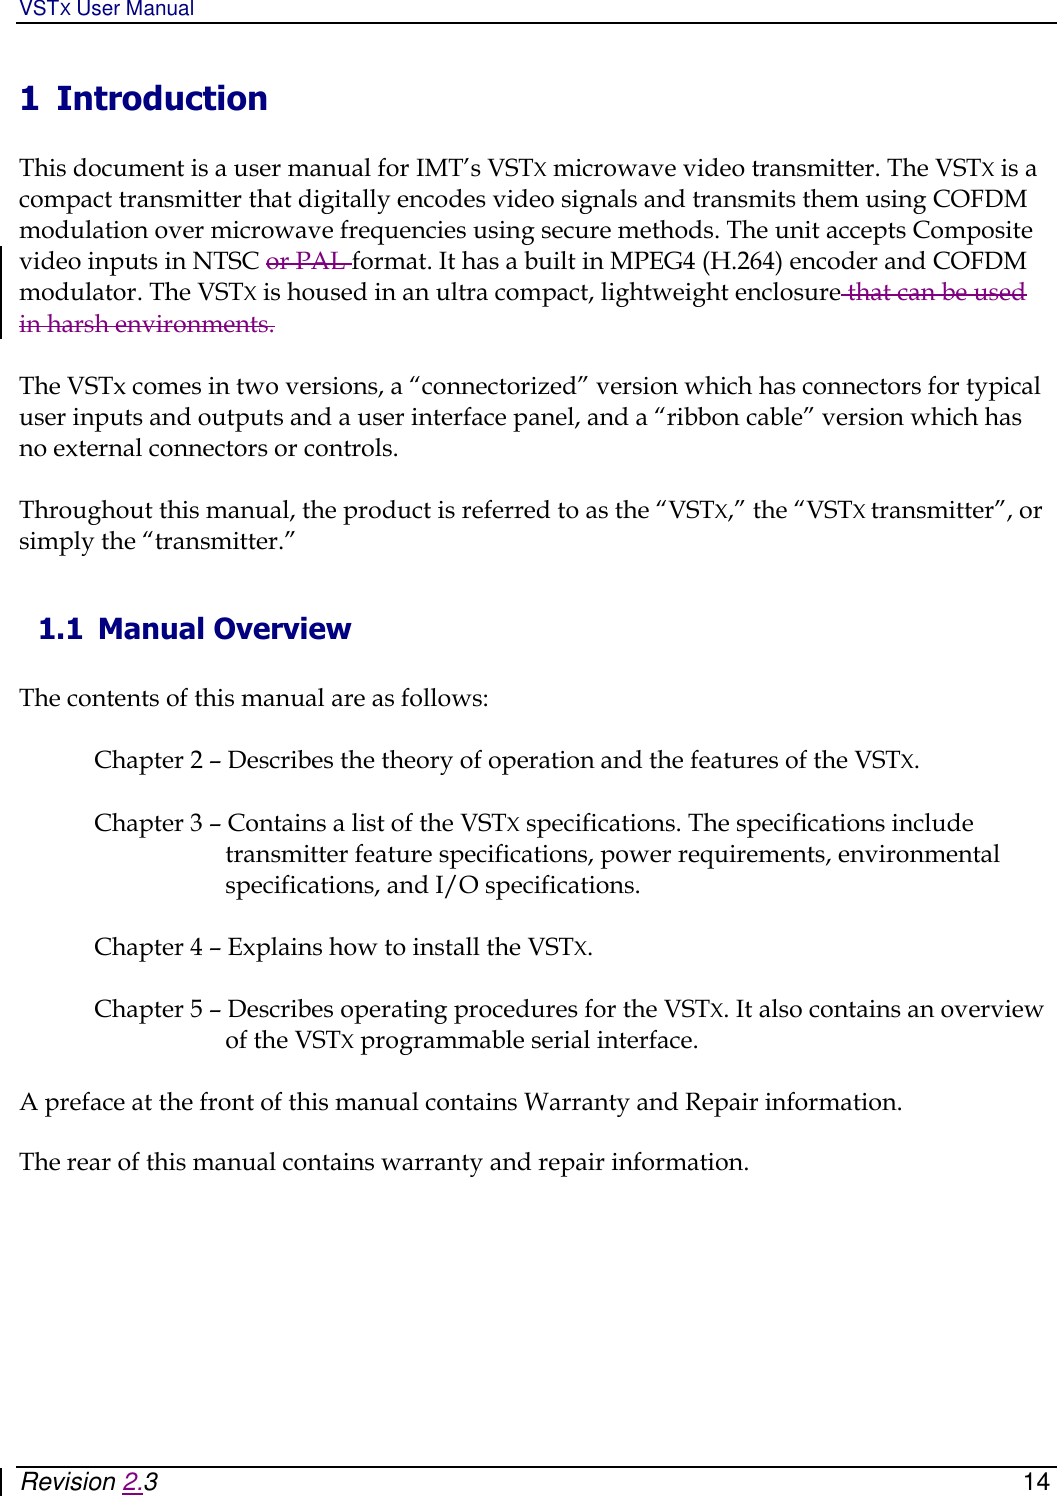 VSTX User Manual   Revision 2.3    14 1 Introduction  This document is a user manual for IMT’s VSTX microwave video transmitter. The VSTX is a compact transmitter that digitally encodes video signals and transmits them using COFDM modulation over microwave frequencies using secure methods. The unit accepts Composite video inputs in NTSC or PAL format. It has a built in MPEG4 (H.264) encoder and COFDM modulator. The VSTX is housed in an ultra compact, lightweight enclosure that can be used in harsh environments.  The VSTx comes in two versions, a “connectorized” version which has connectors for typical user inputs and outputs and a user interface panel, and a “ribbon cable” version which has no external connectors or controls.    Throughout this manual, the product is referred to as the “VSTX,” the “VSTX transmitter”, or simply the “transmitter.”  1.1 Manual Overview  The contents of this manual are as follows:  Chapter 2 – Describes the theory of operation and the features of the VSTX.  Chapter 3 – Contains a list of the VSTX specifications. The specifications include transmitter feature specifications, power requirements, environmental specifications, and I/O specifications.   Chapter 4 – Explains how to install the VSTX.   Chapter 5 – Describes operating procedures for the VSTX. It also contains an overview of the VSTX programmable serial interface.  A preface at the front of this manual contains Warranty and Repair information.   The rear of this manual contains warranty and repair information.       